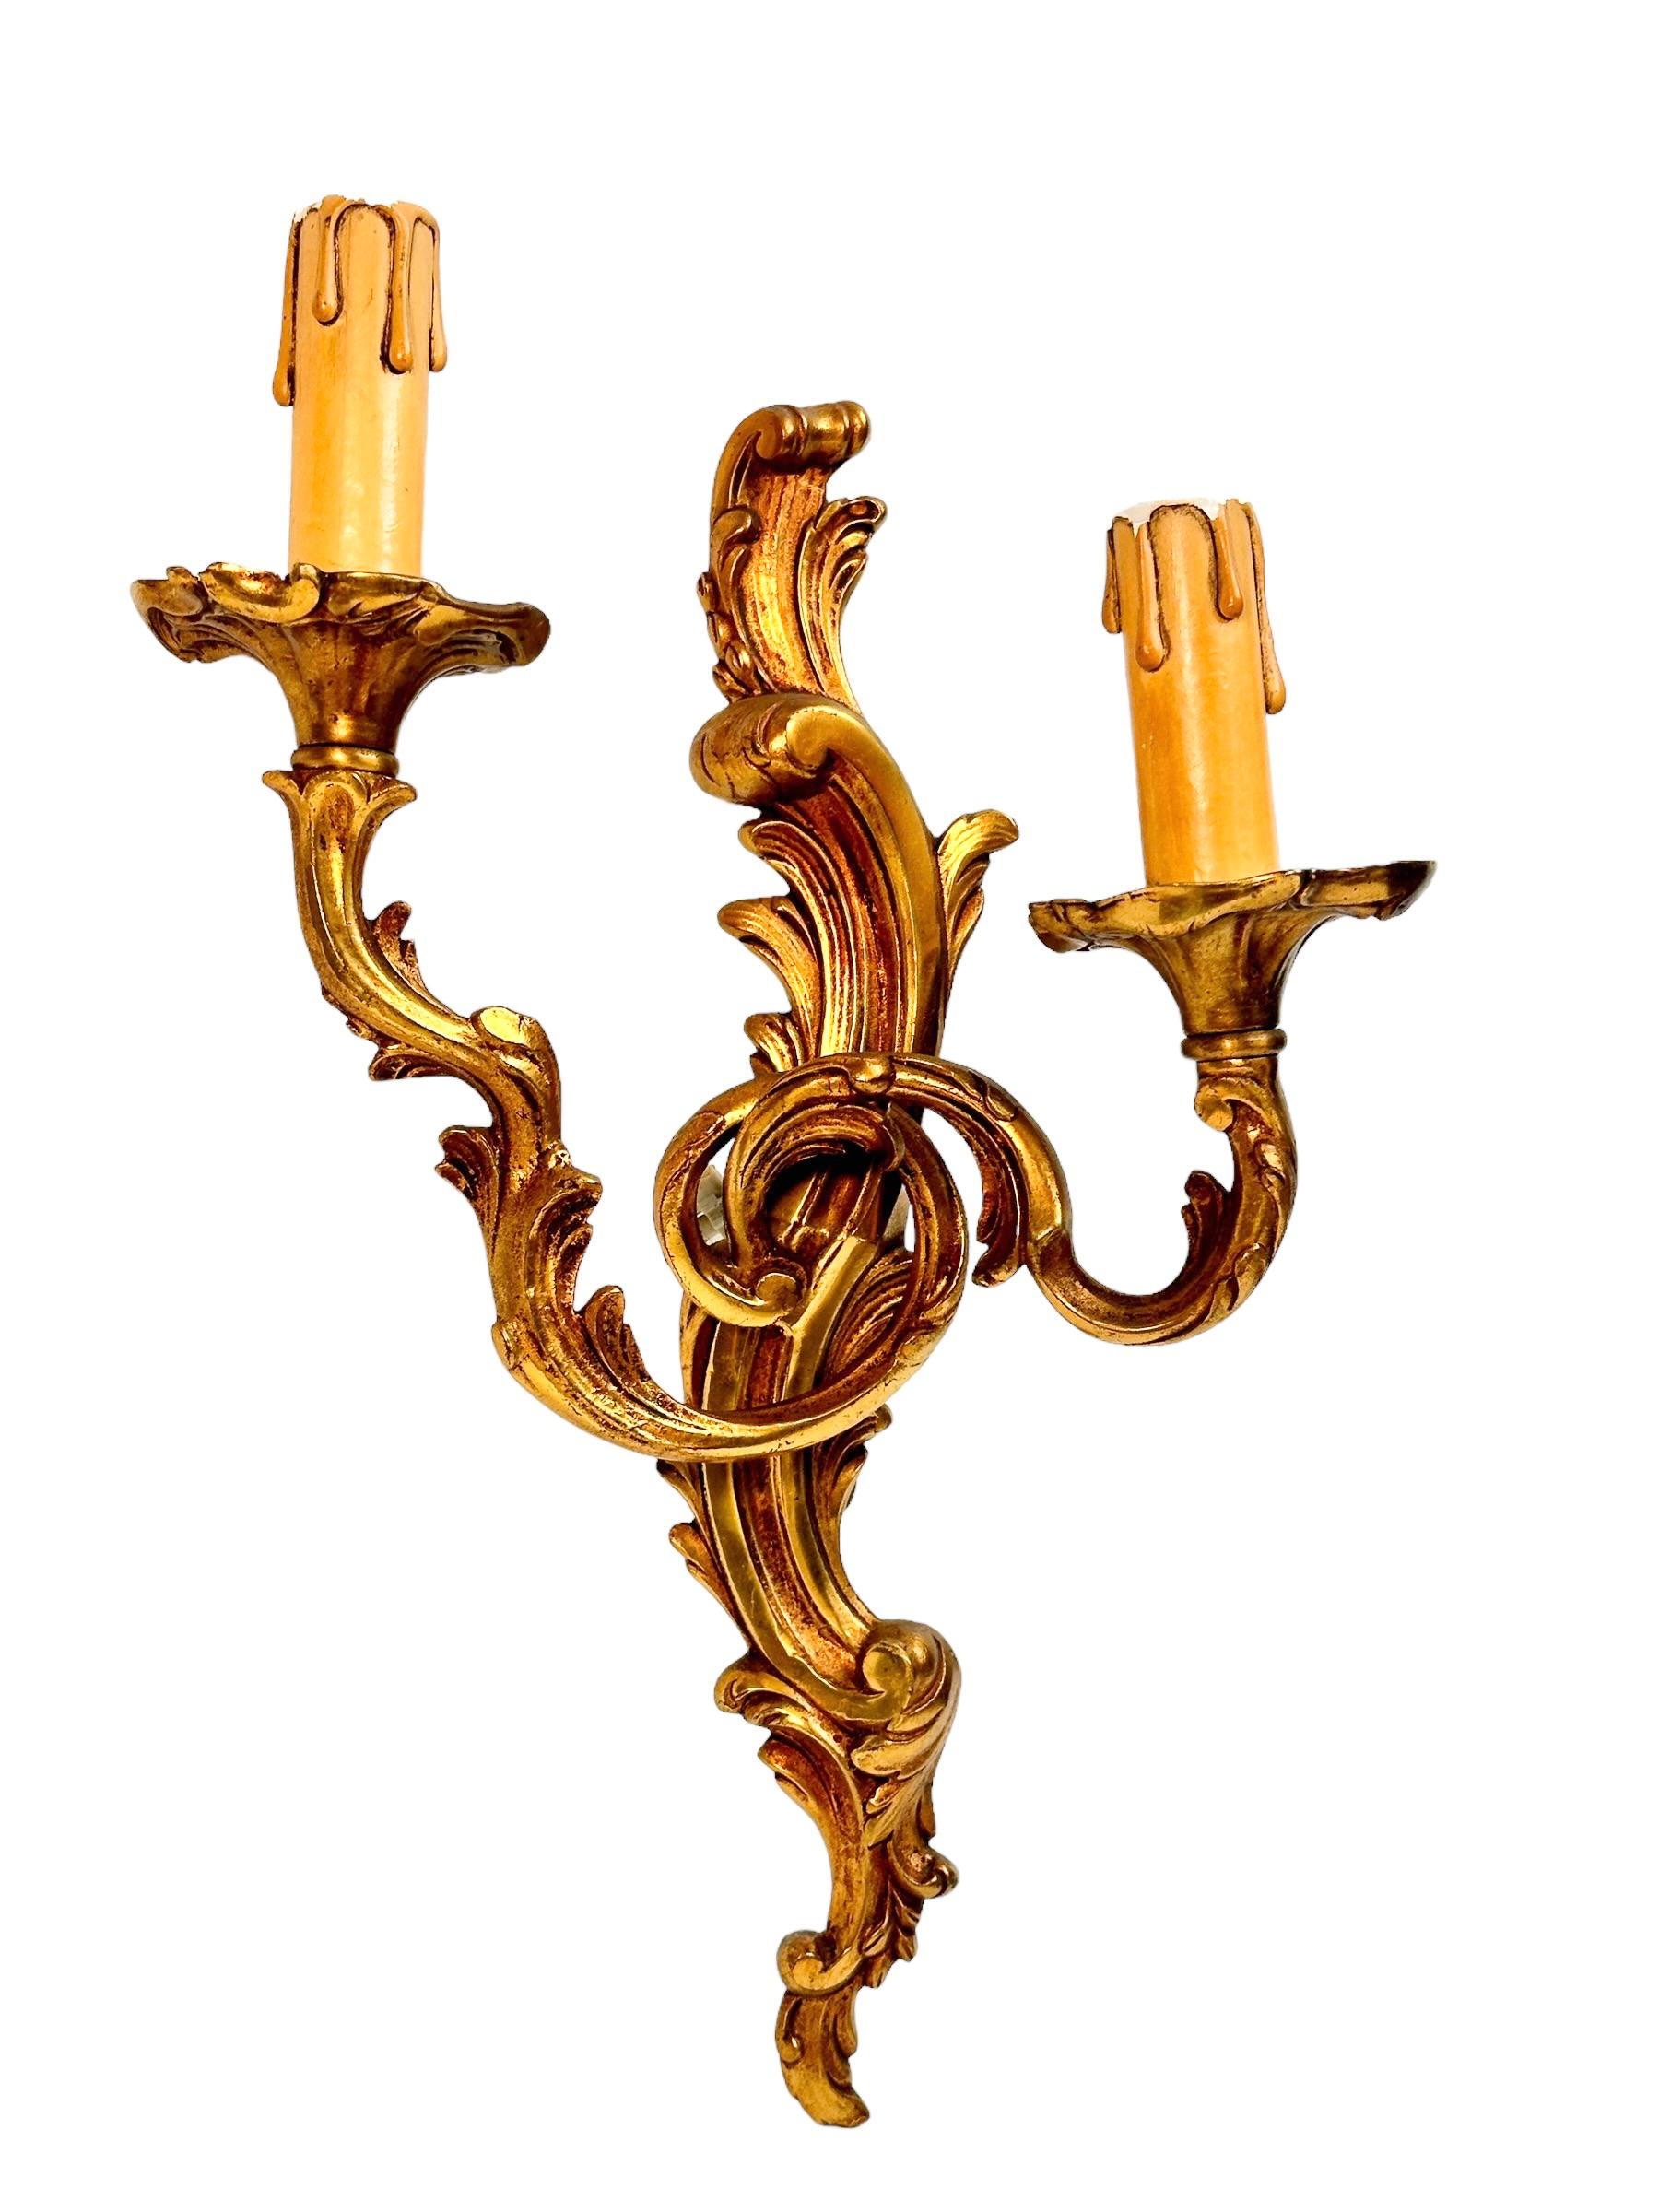 A nice set of three sconces with 2 light sources, made of bronze with decoration of acanthus leaves. Each fixture requires two European E14 candelabra bulbs, each up to 40 watts. The wall lights have a beautiful patina and gives each room an